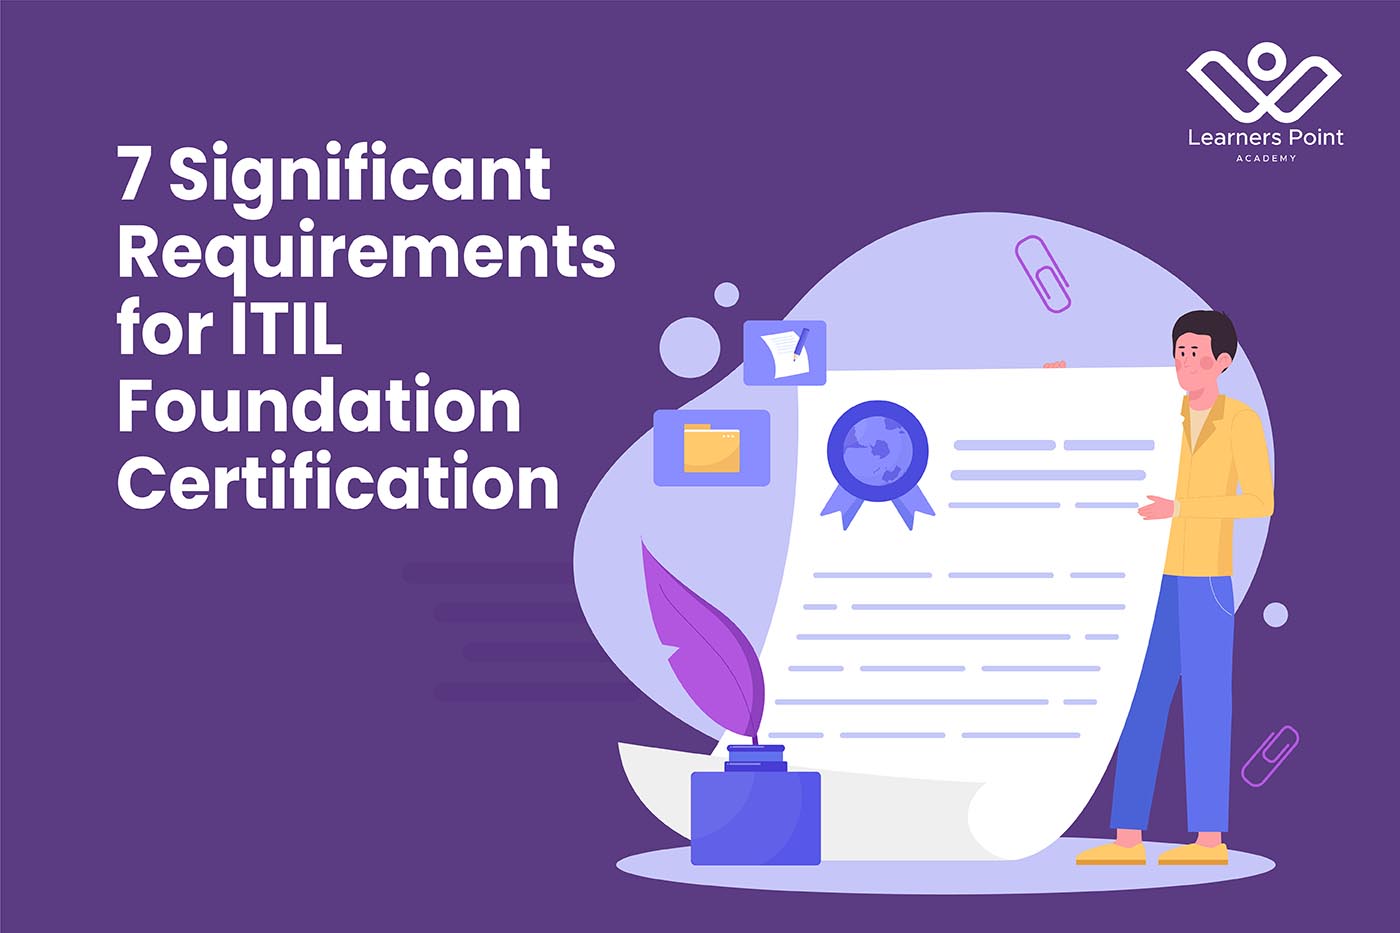 7 Significant Requirements for ITIL Foundation Certification